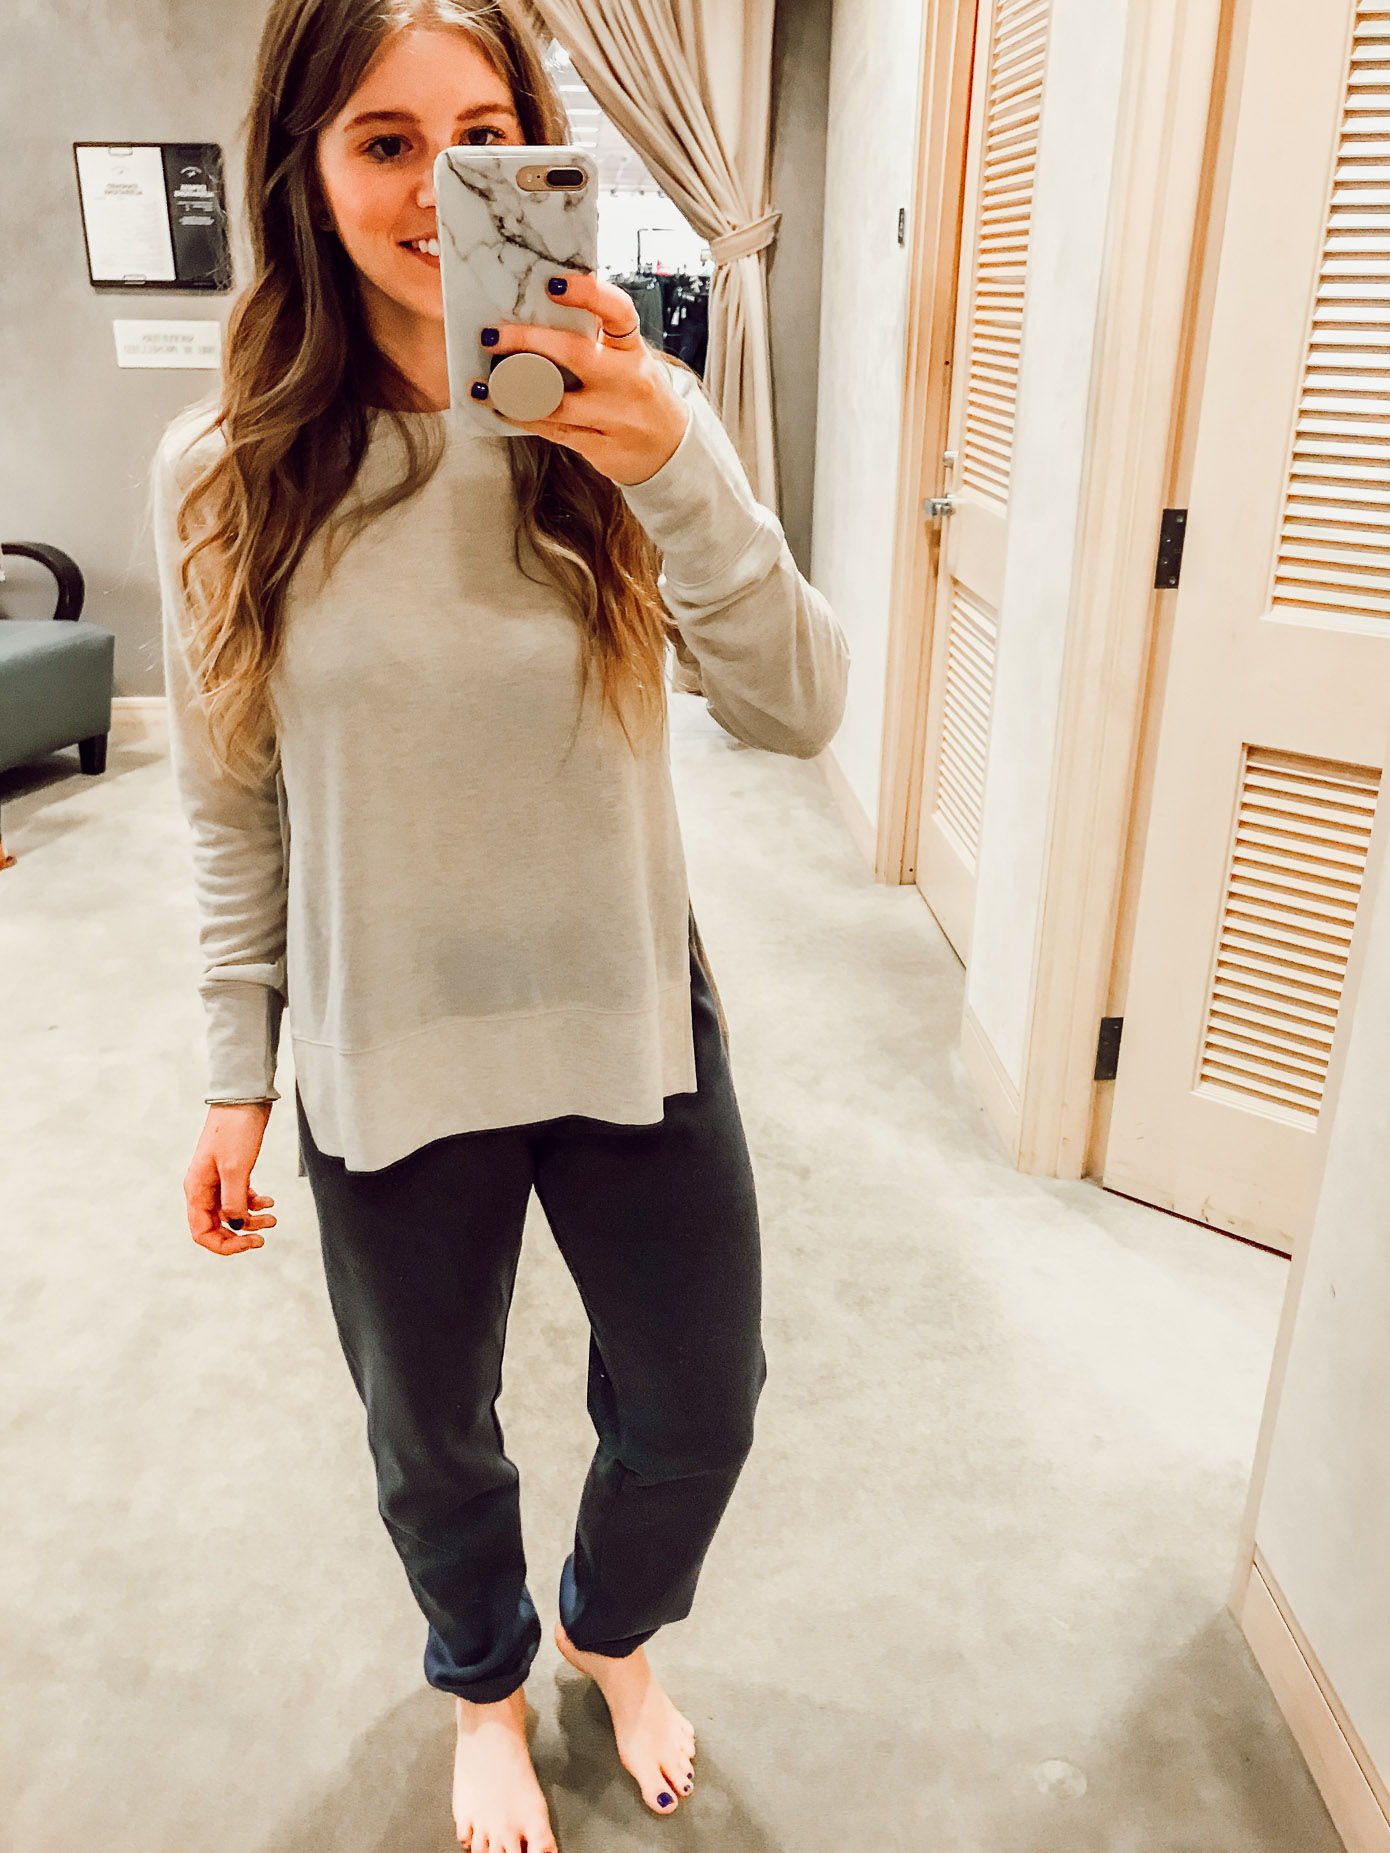 Alo 'Glimpse' Long Sleeve Top and Make + Model Sleepy High Rise Lounge Jogger Pants | 2018 Nordstrom Anniversary Fitting Room Session featured on Louella Reese Life & Style Blog